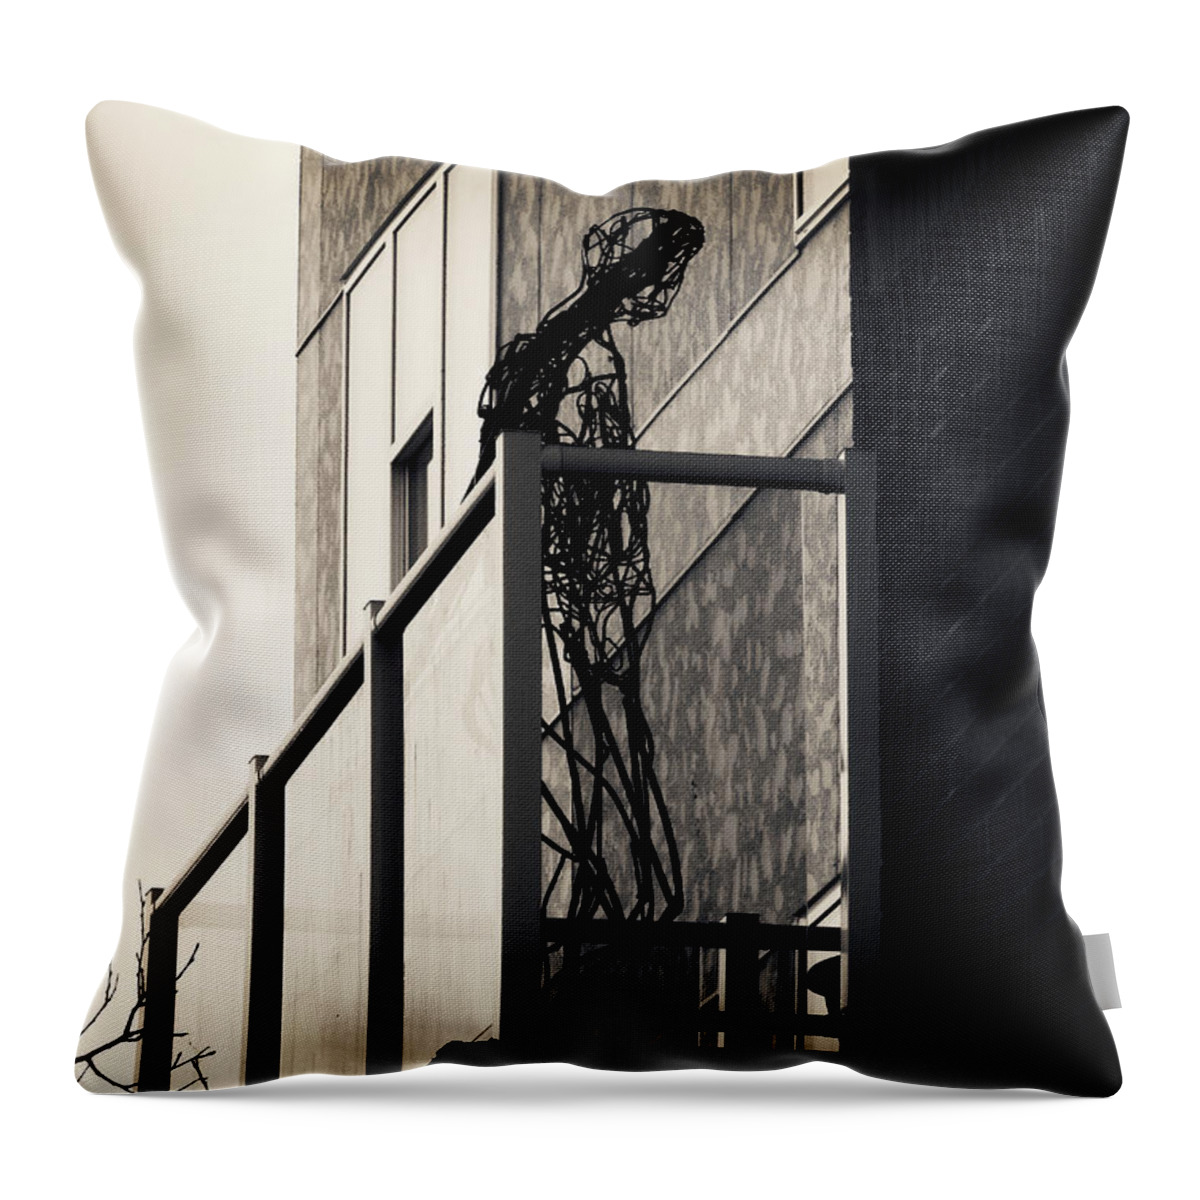 Cage Throw Pillow featuring the photograph Your Own Cage by Zinvolle Art